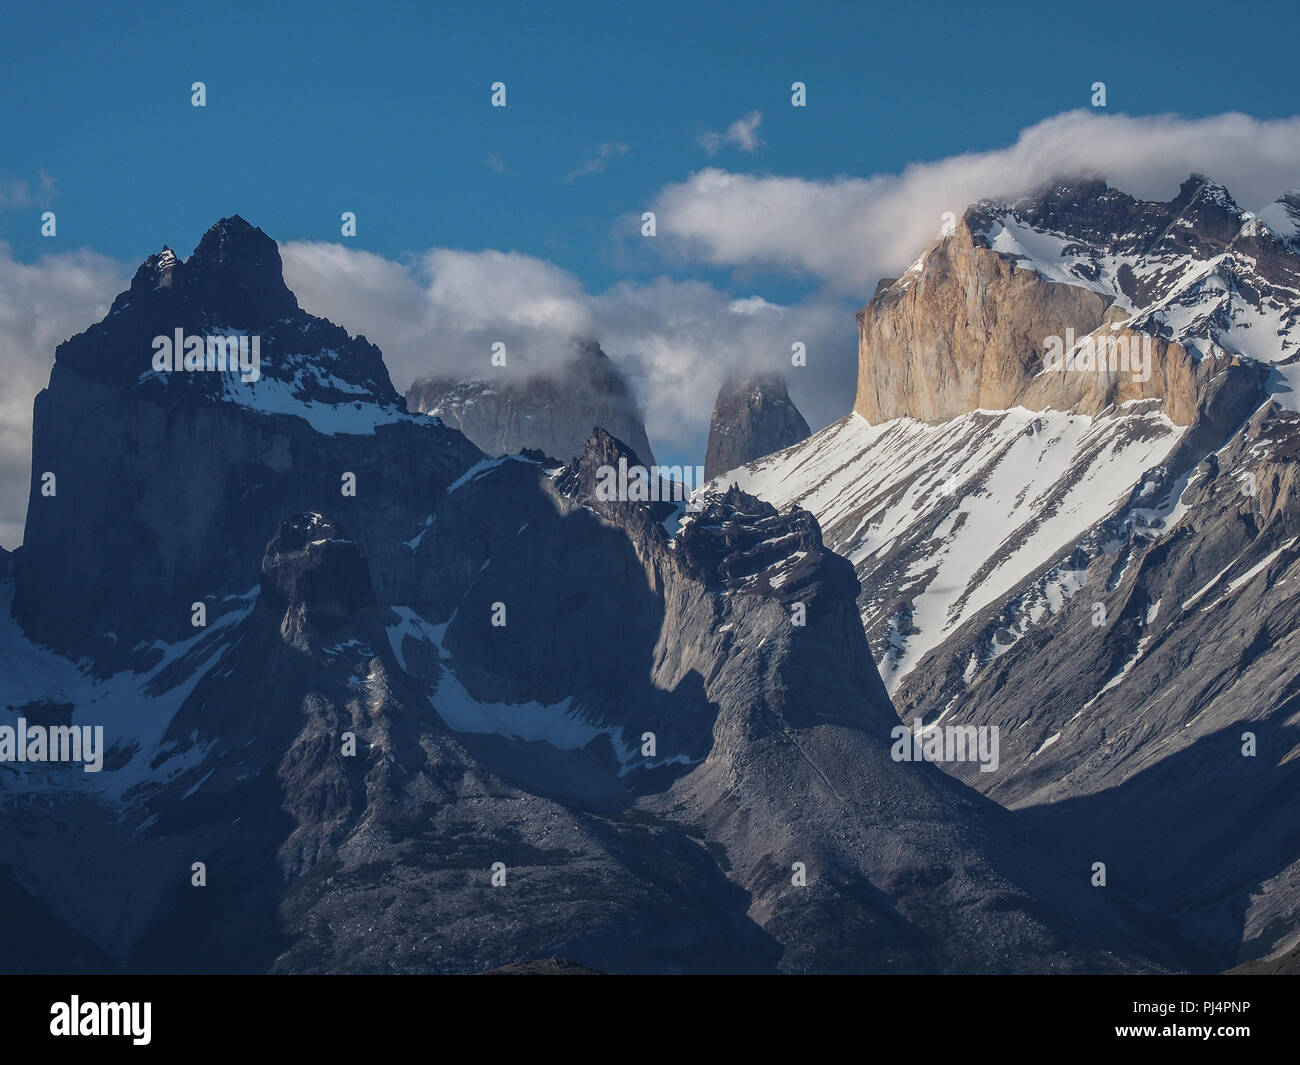 Torres del Paine National Park (spanish: Parque Nacional Torres del Paine) with the  Towers of Paine and Paine Horns, southern Chilean Patagonia. Stock Photo